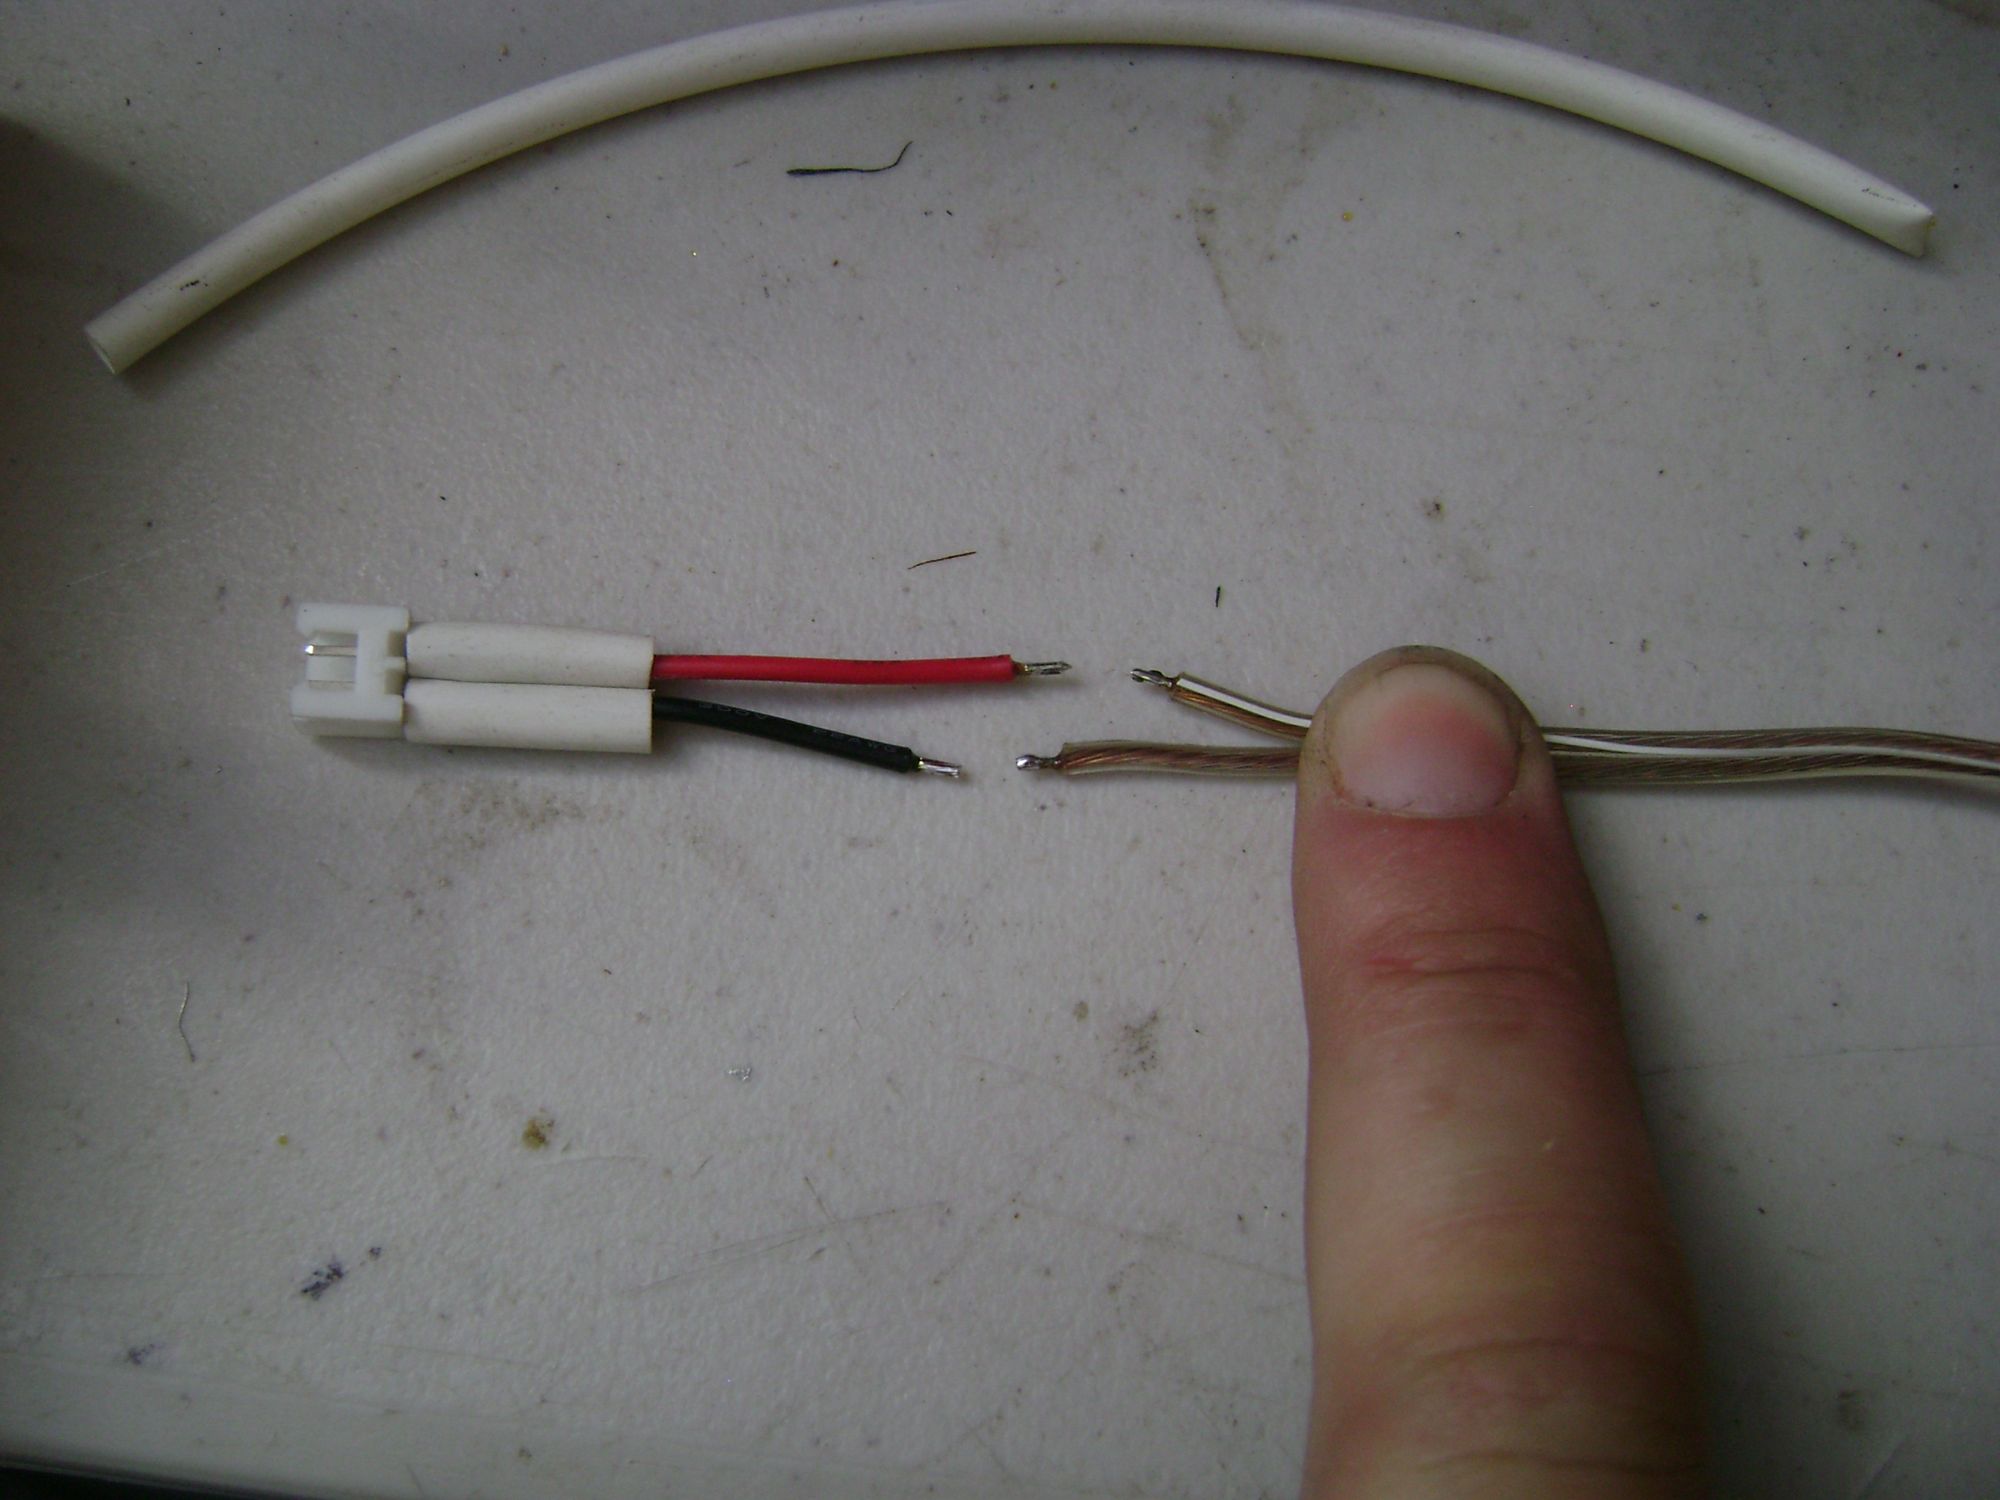 Position the Heat Shrink Tubing *BEFORE* soldering